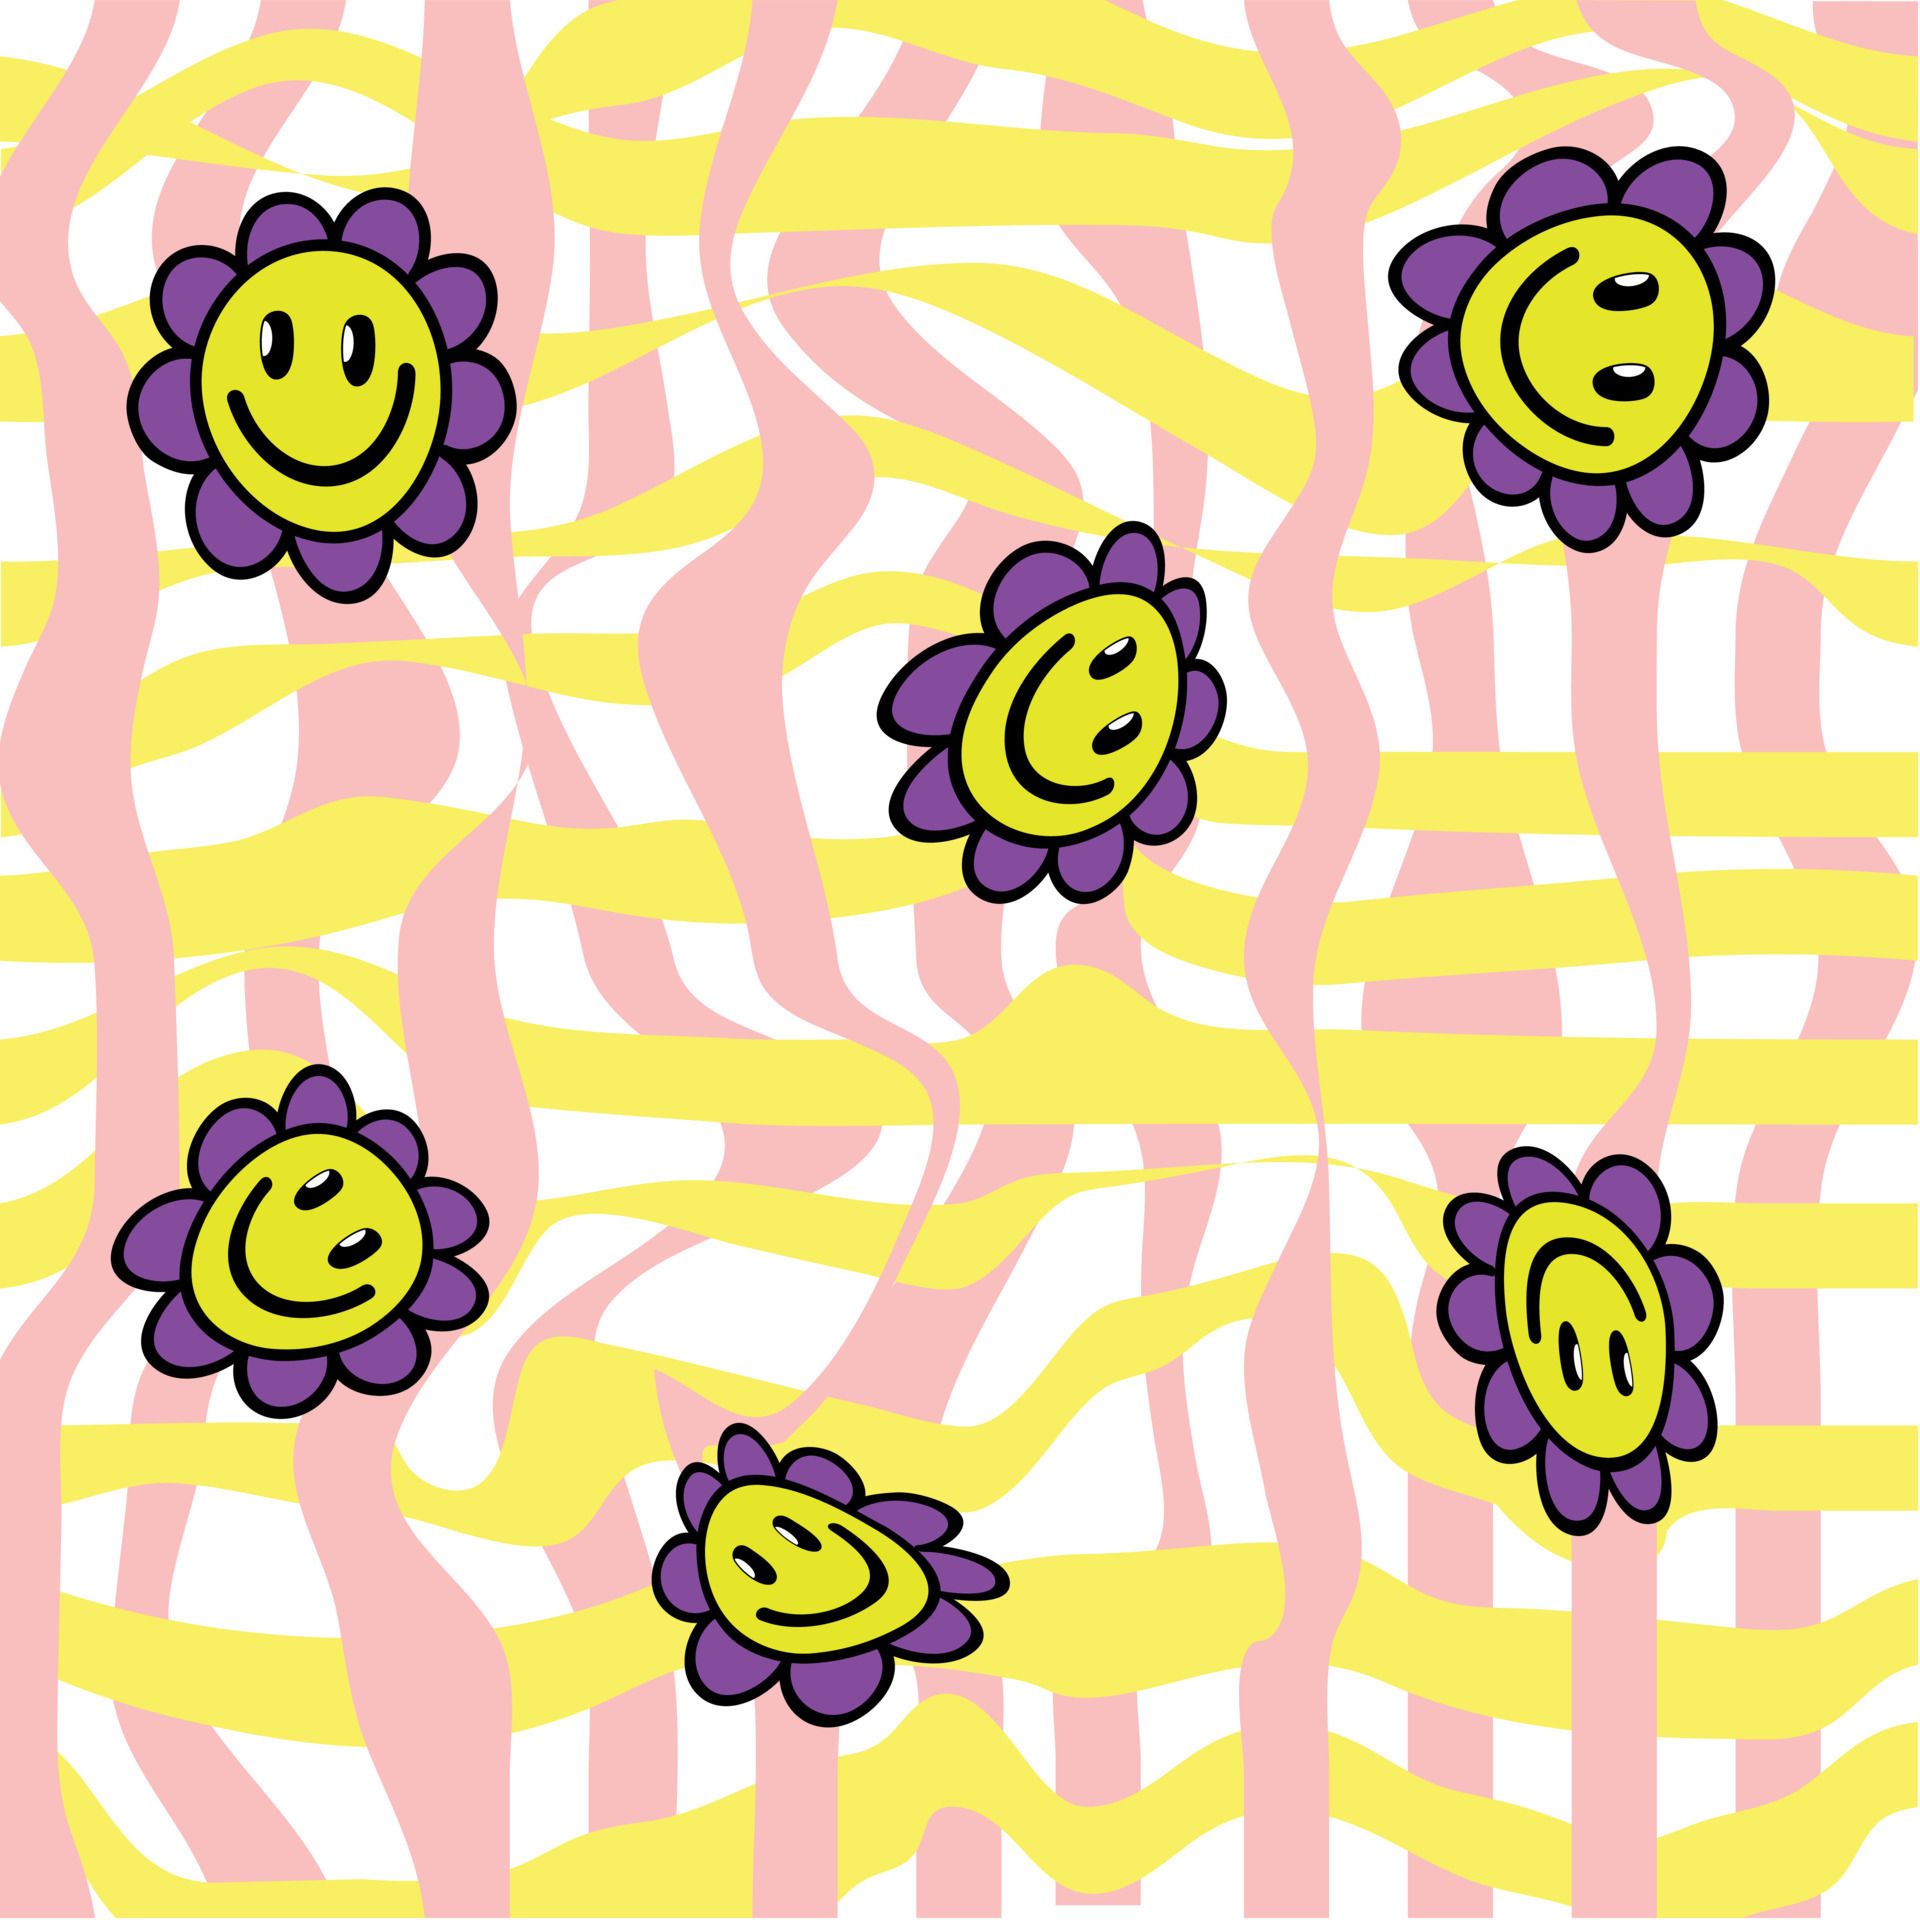 Groovy Retro 1970s Wallpaper with Daisy Smile. Cute Psychedelic Vector Background with Smiles and Wavy Grid